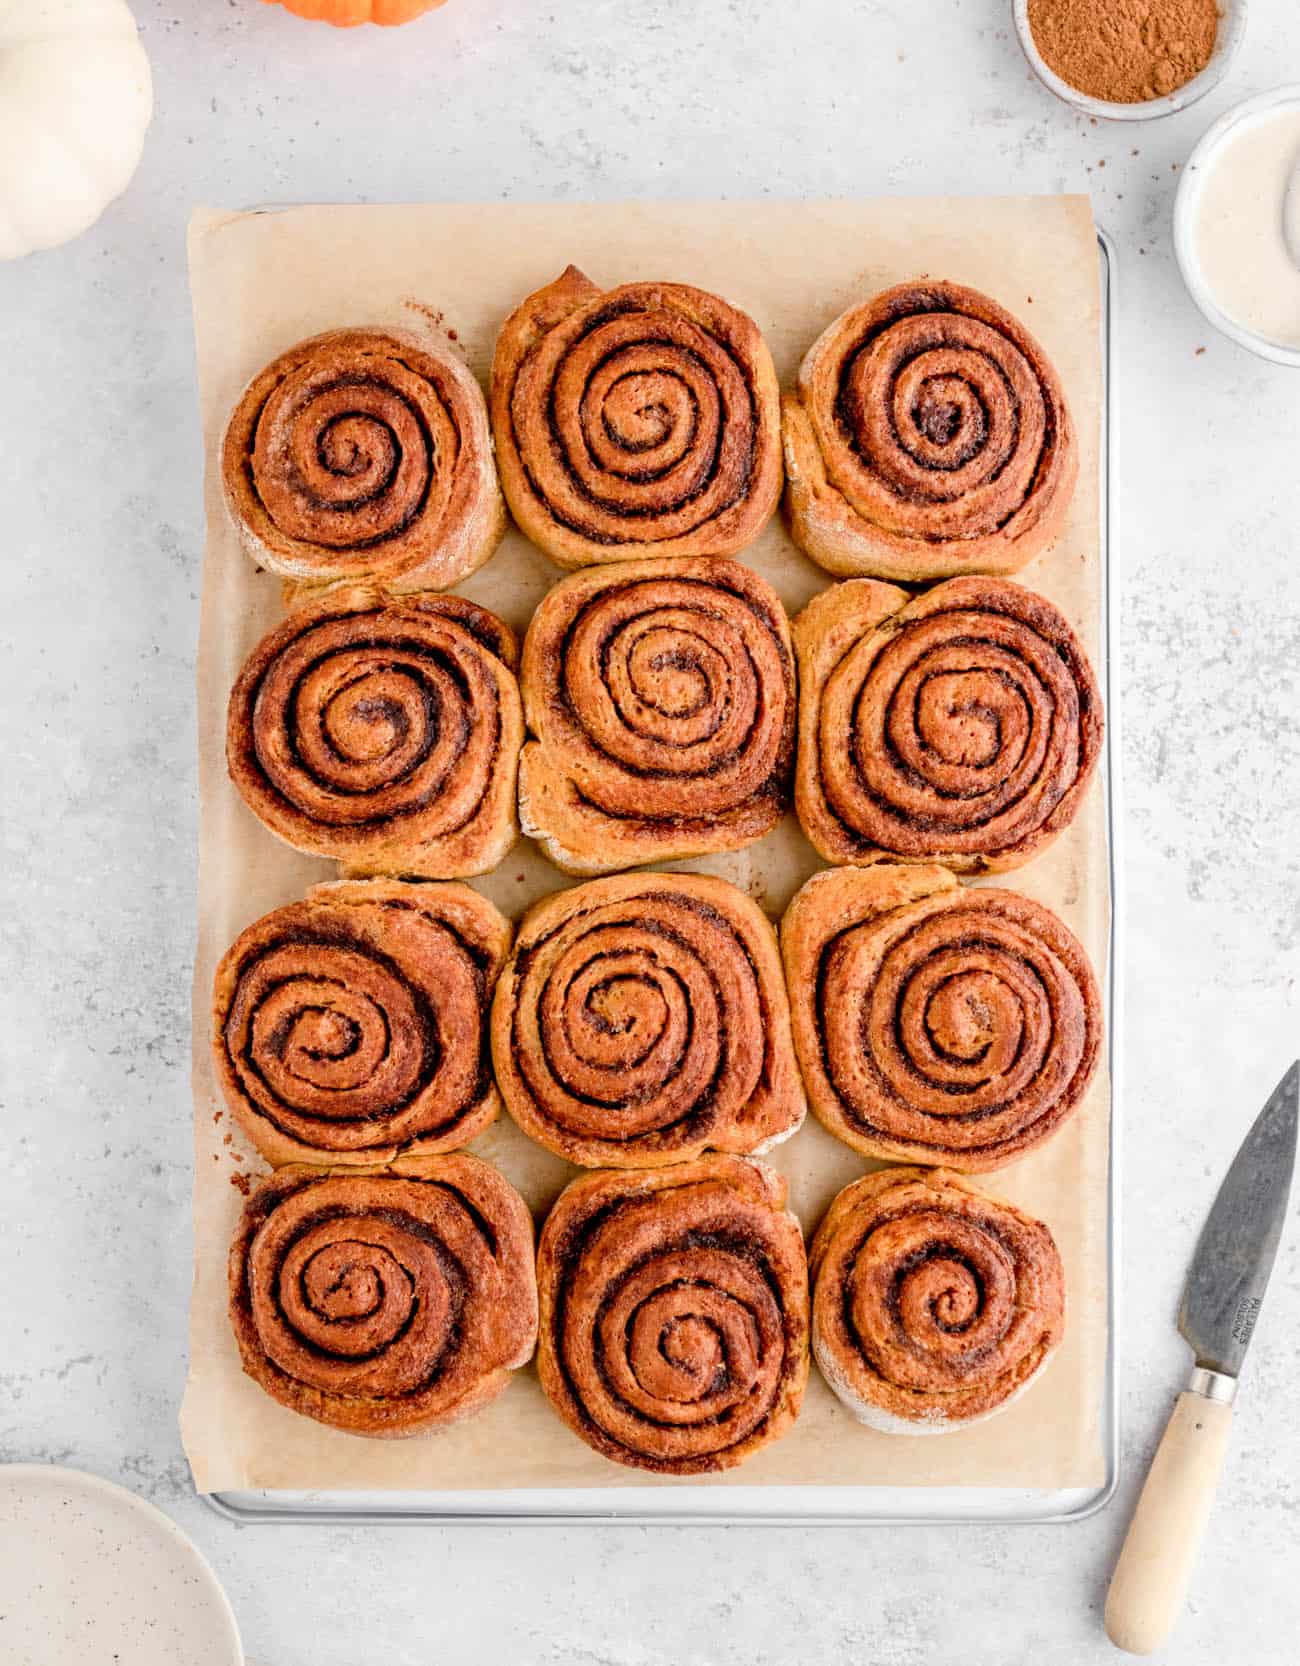 rolls baked in the oven